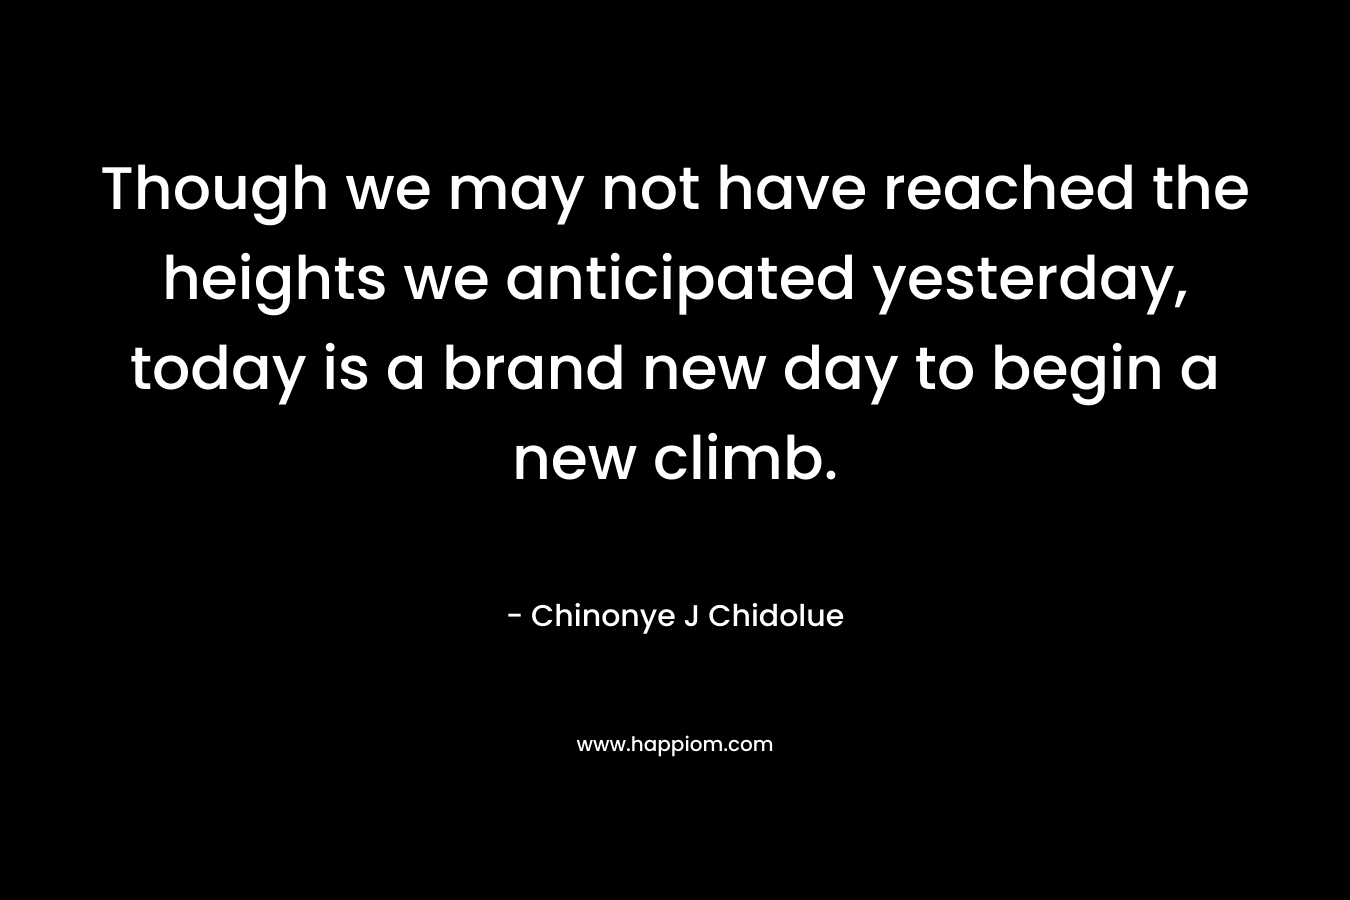 Though we may not have reached the heights we anticipated yesterday, today is a brand new day to begin a new climb.